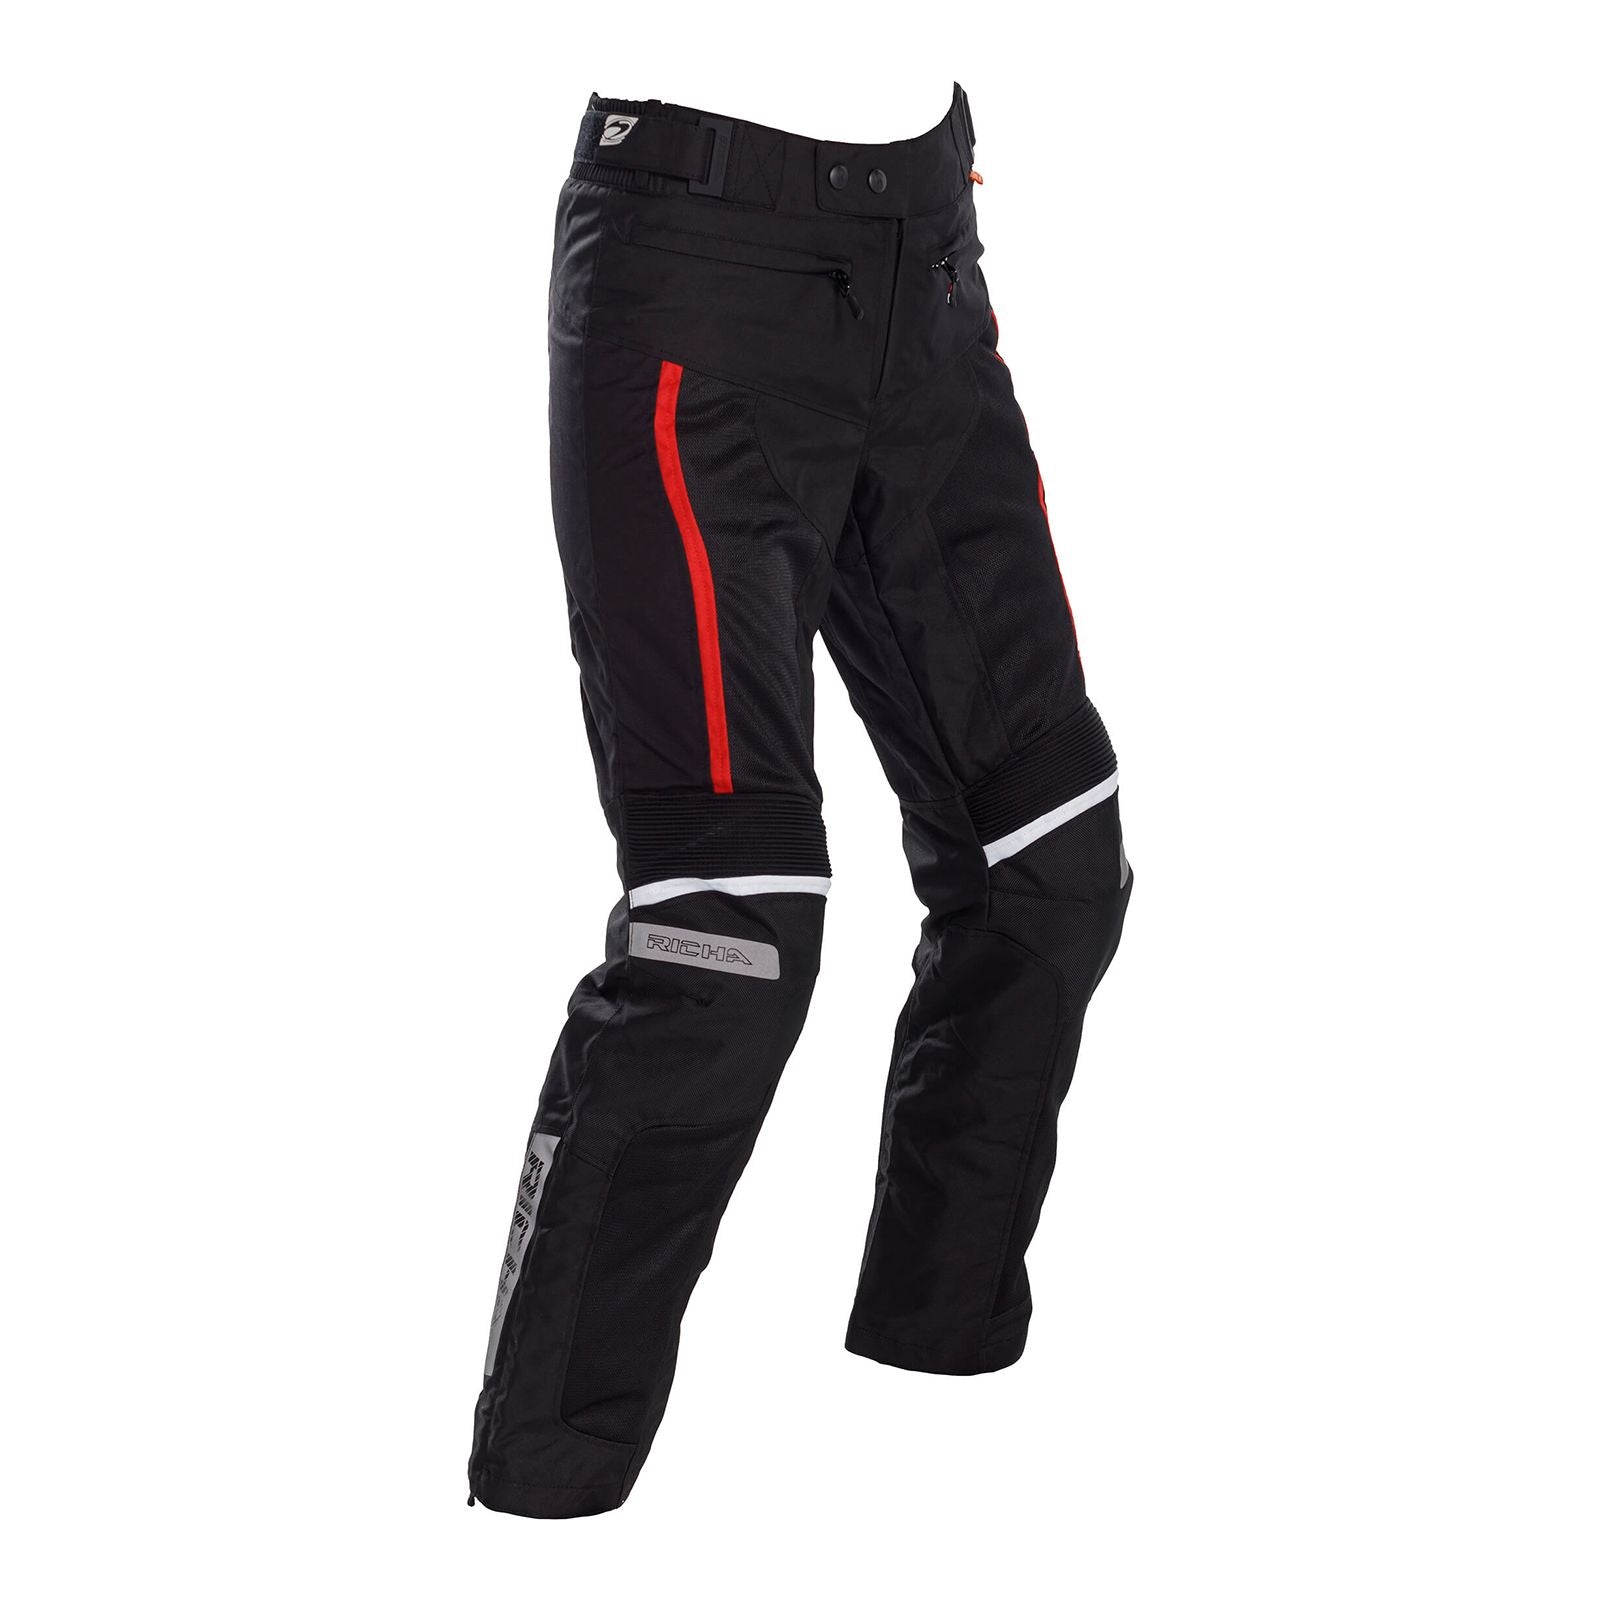 New RICHA AIRVENT EVO PANT BLK//RED 2XL RATPAVABR2XL